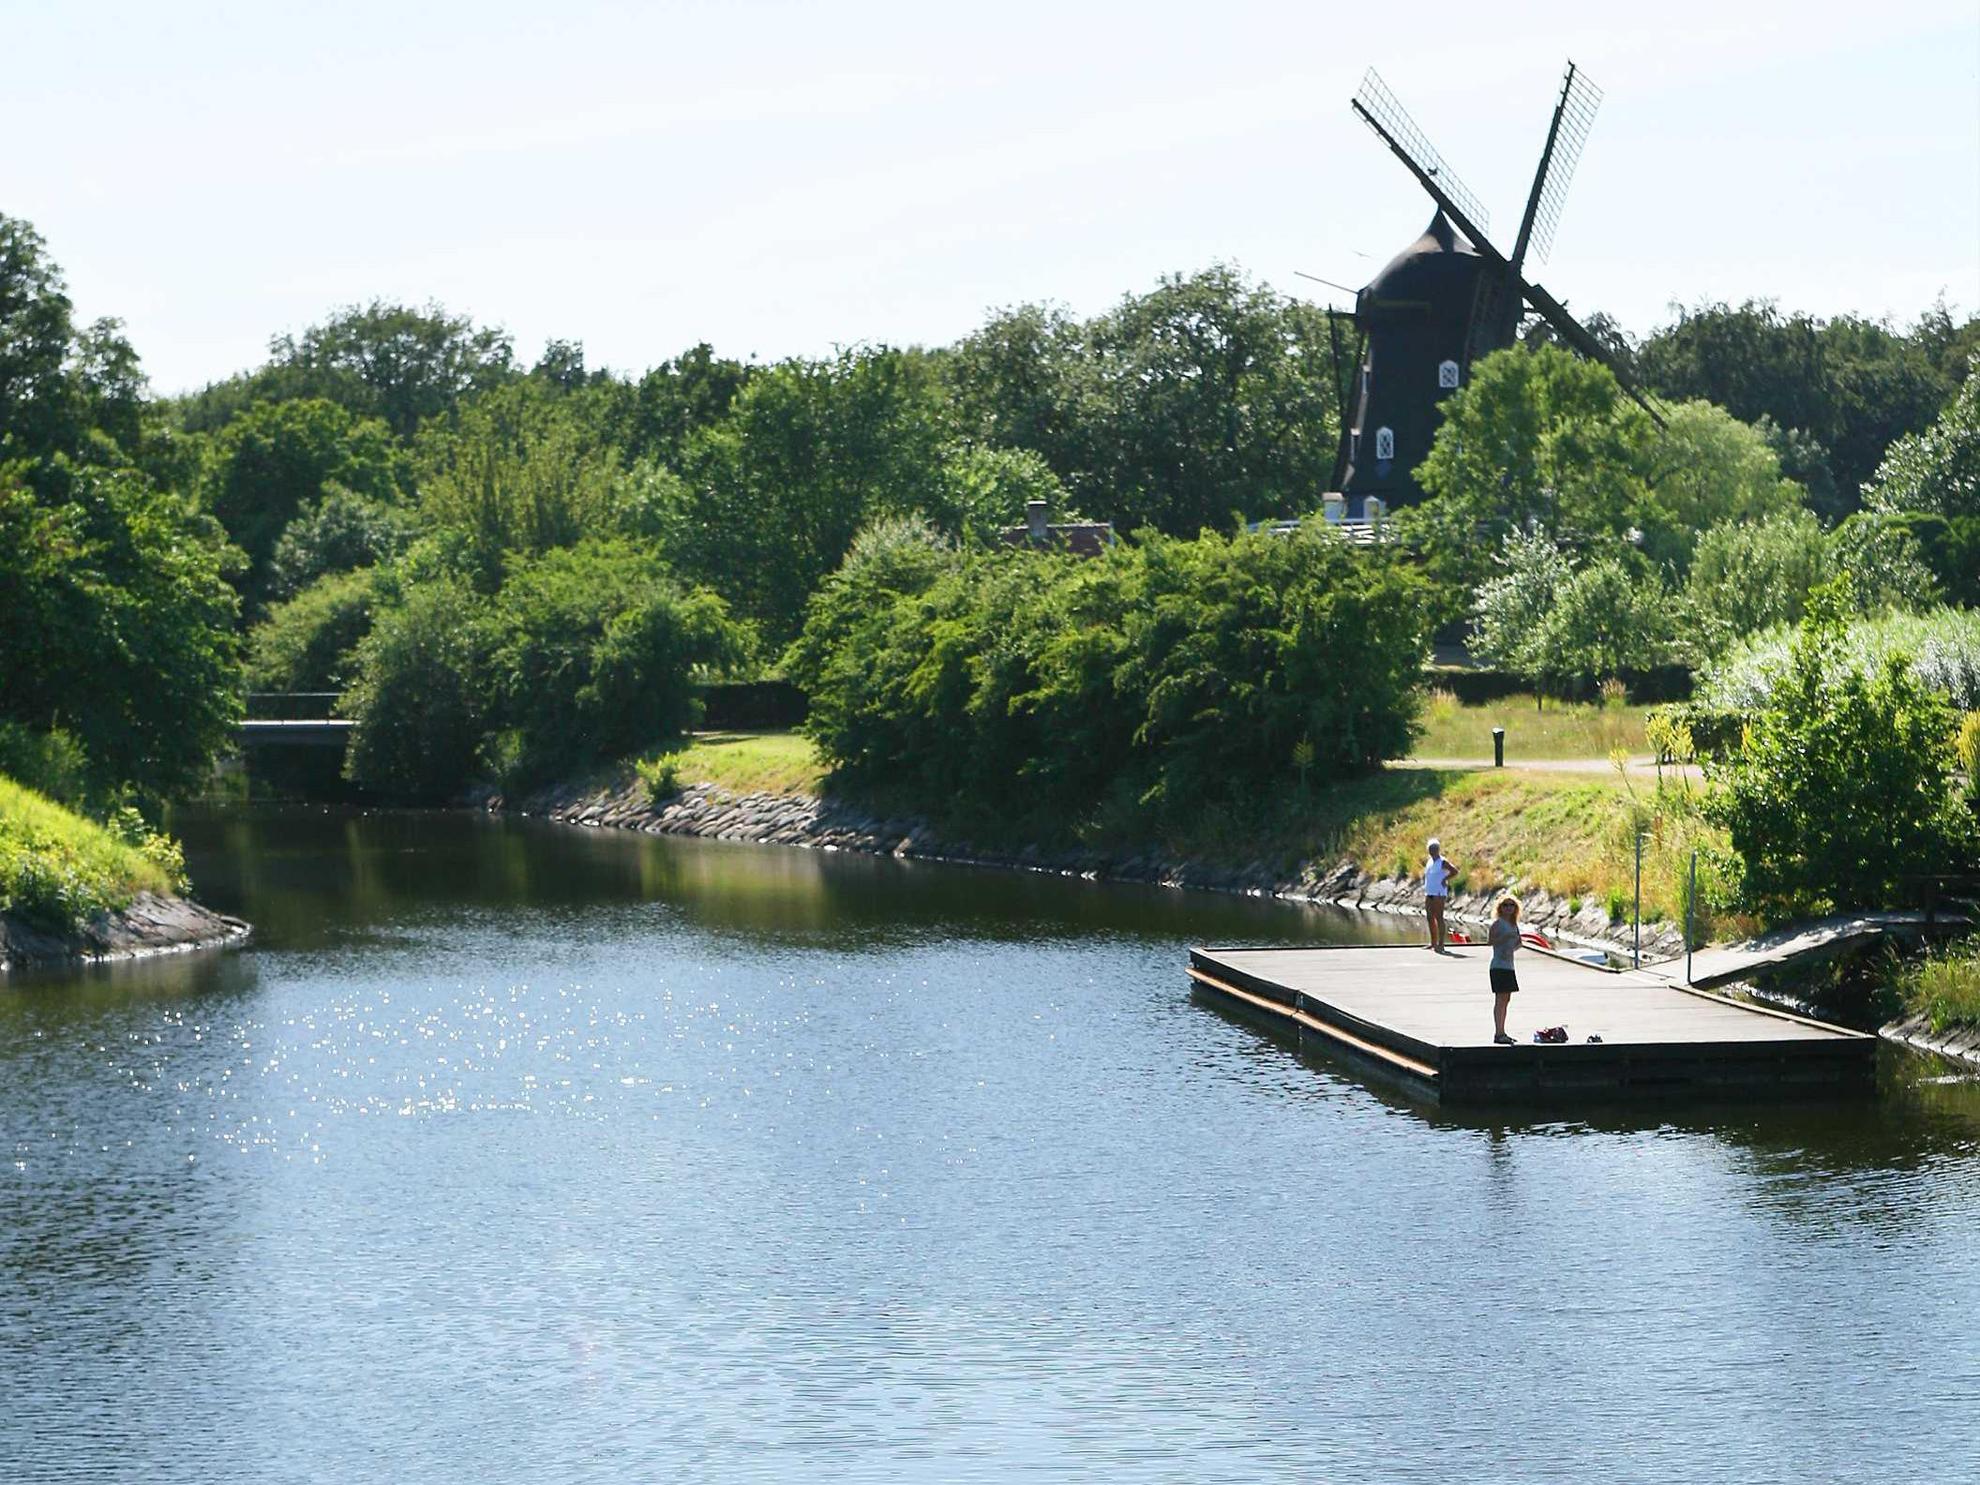 Two women standing on a jetty on a canal in a city garden. There is a windmill surrounded by greenery in the background.